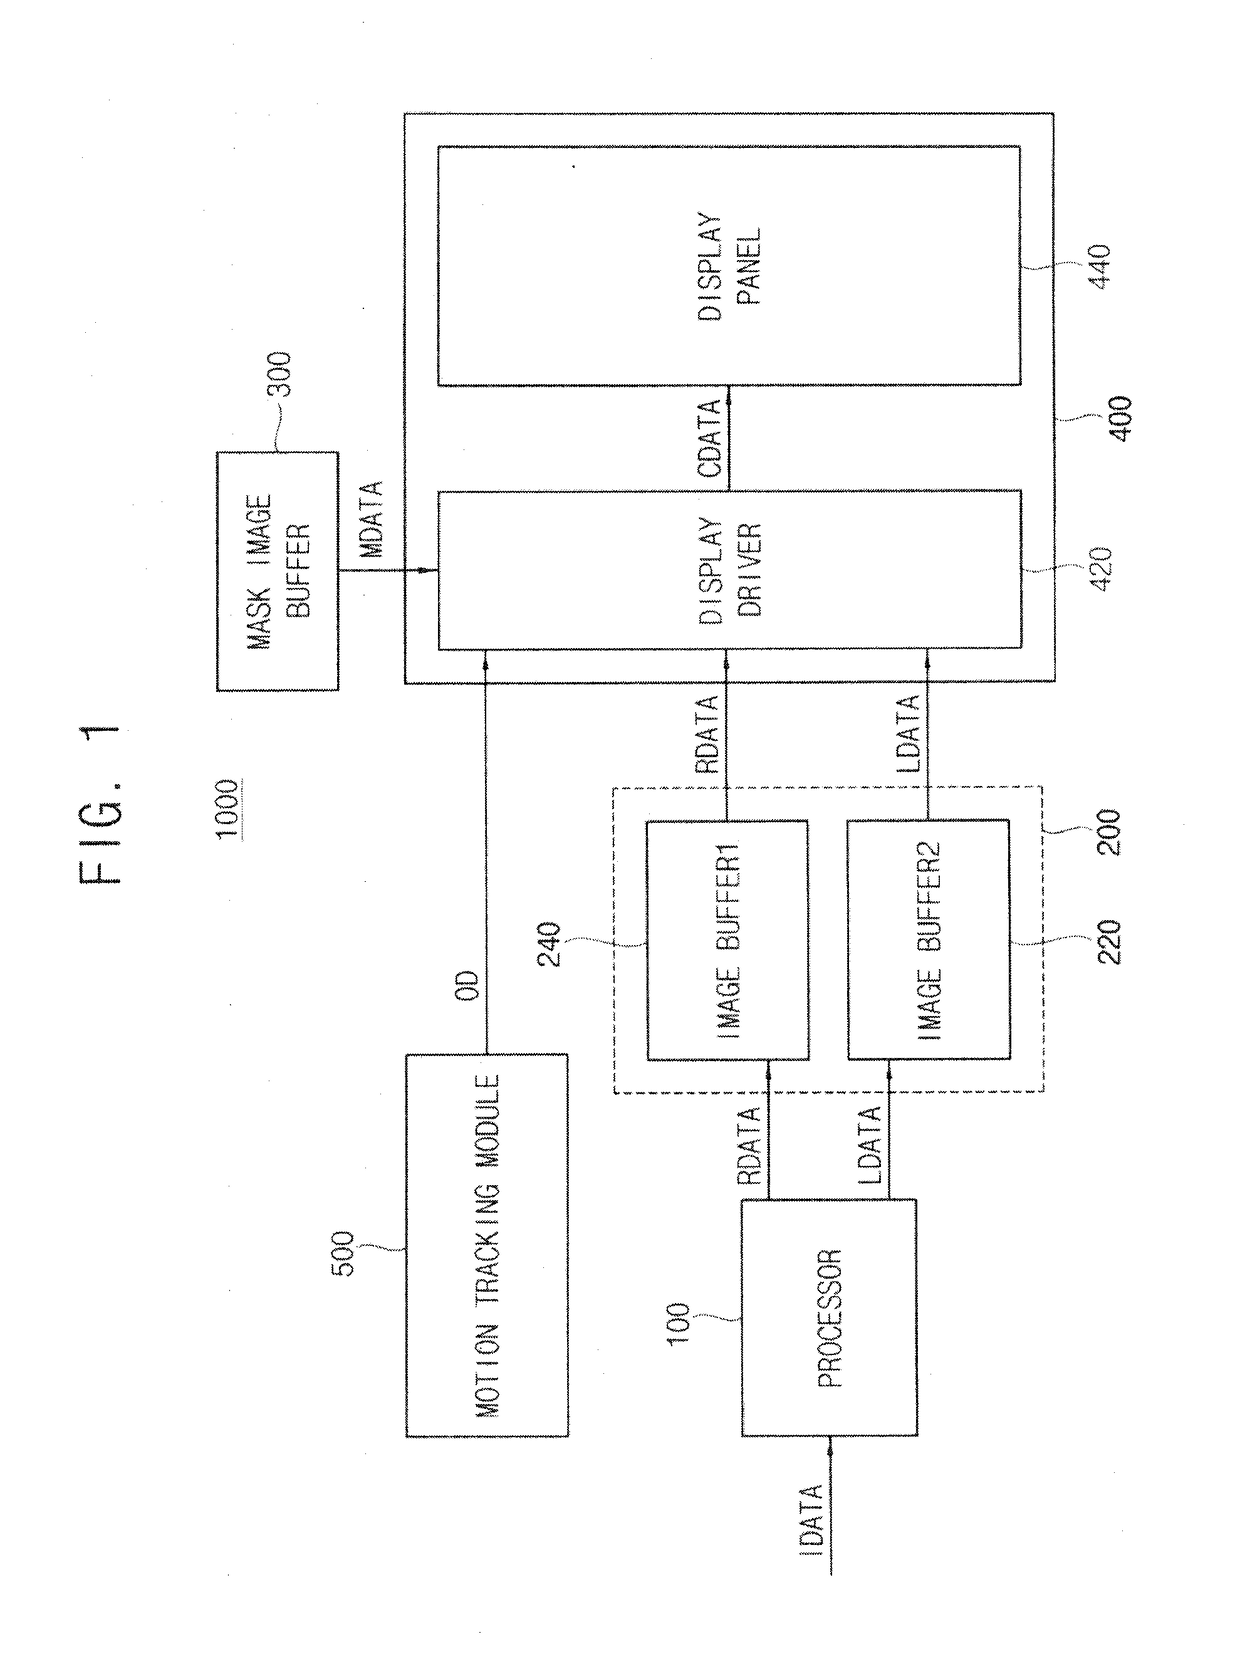 Electronic device and method for displaying an image on head mounted display device